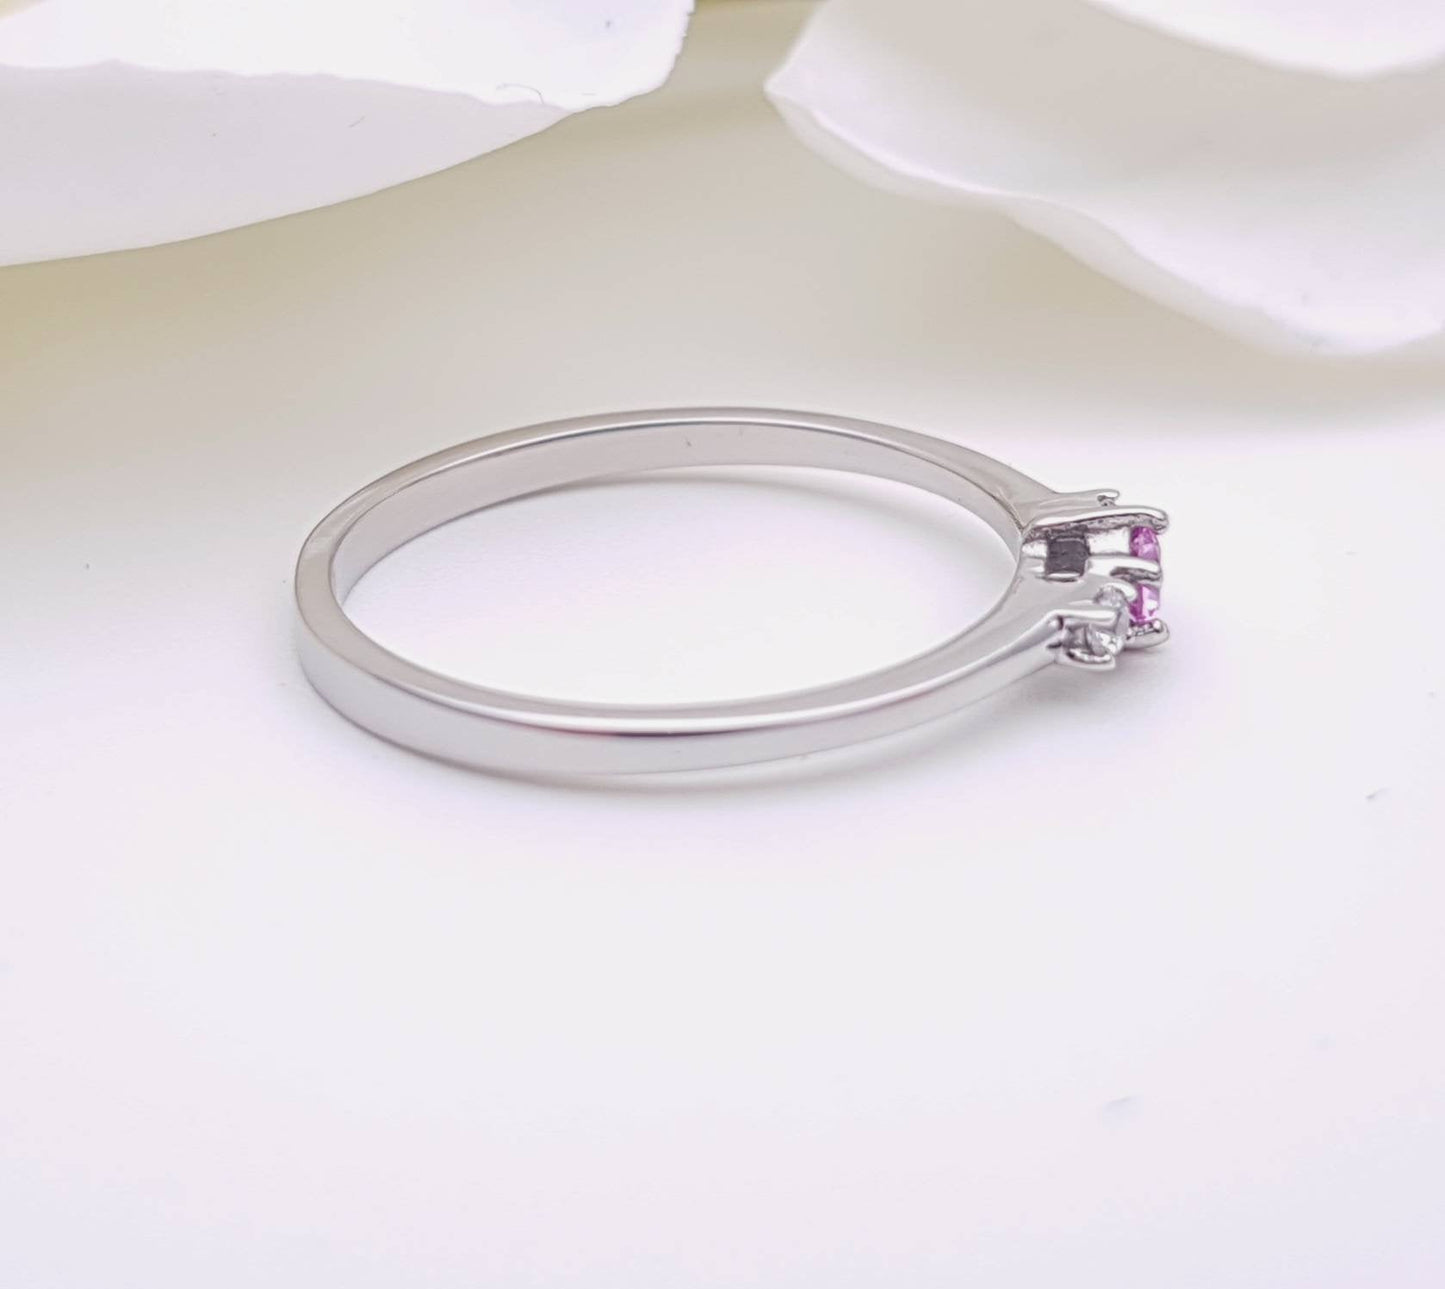 Pink Tourmaline and White Sapphire 3 stone Trilogy Ring in White Gold or Titanium  - engagement ring - handmade ring